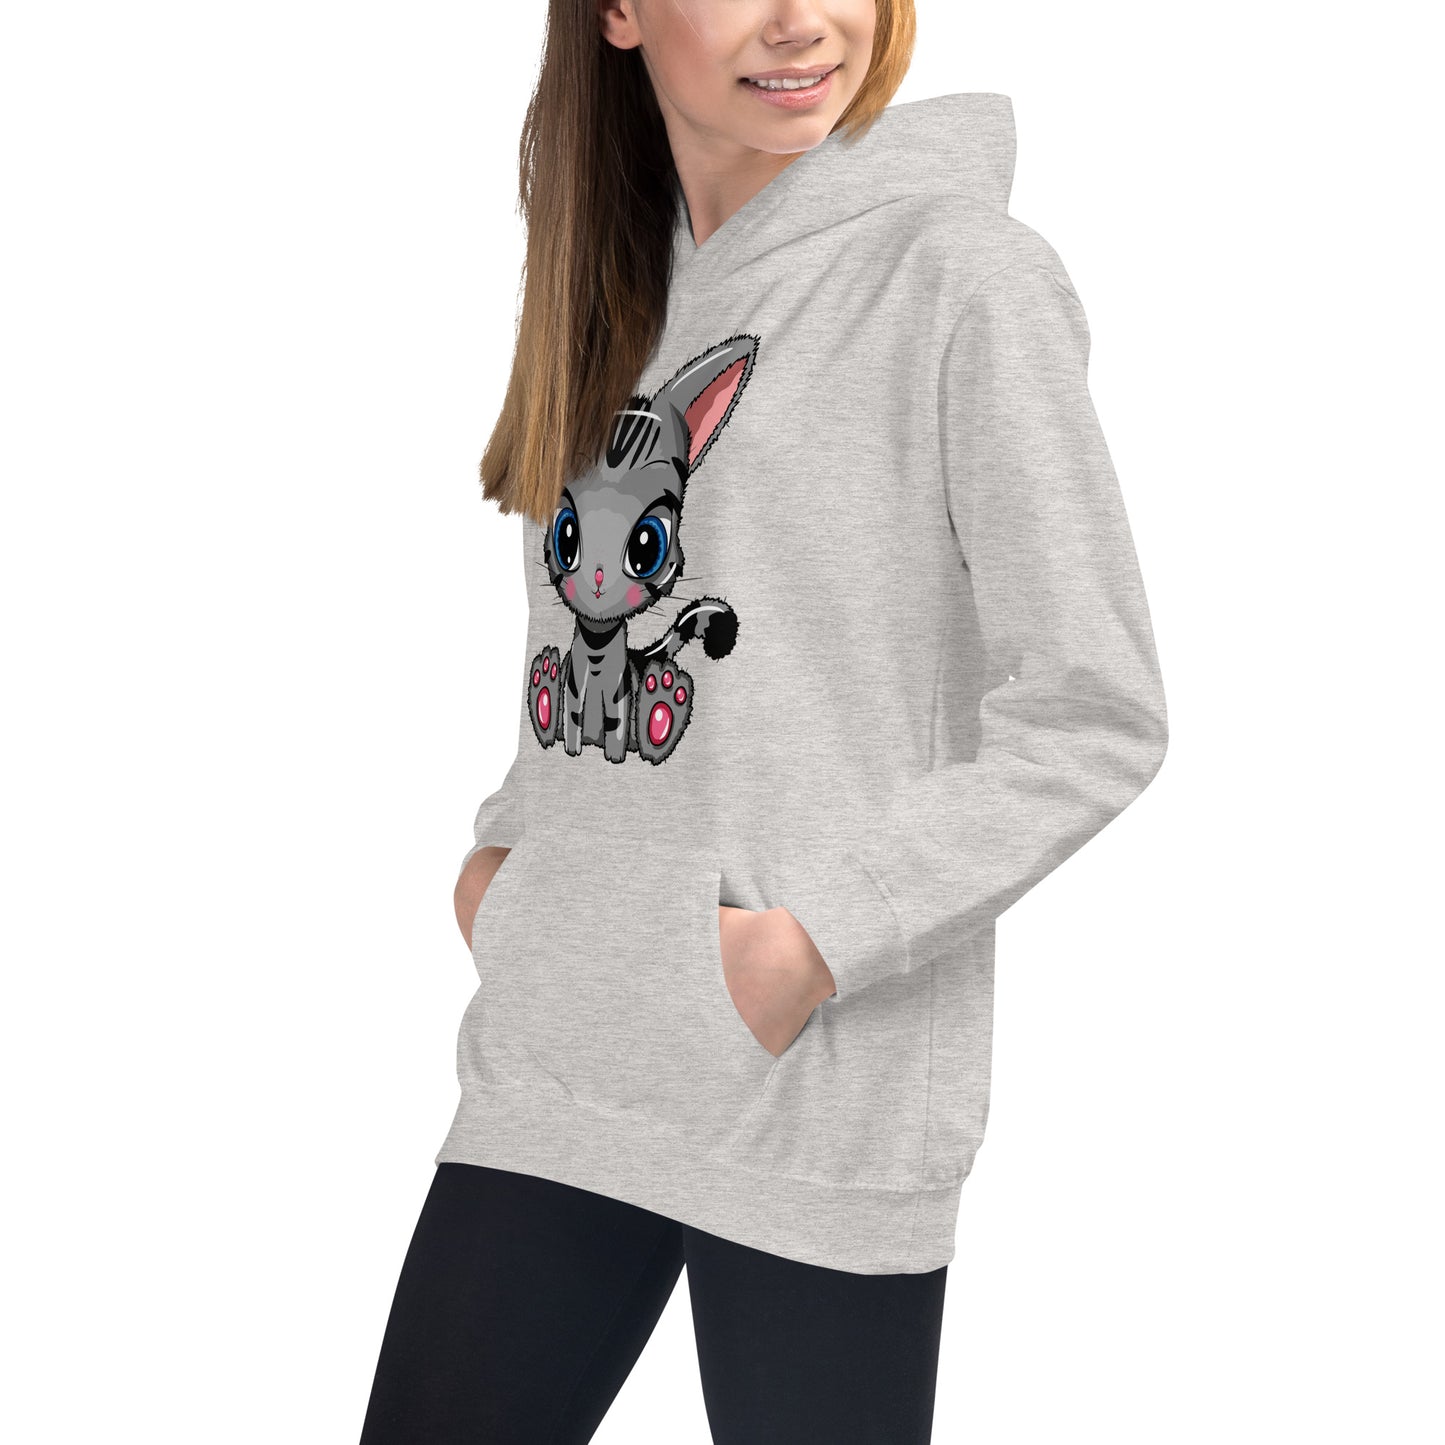 Lovely Little Cat Hoodie, No. 0543